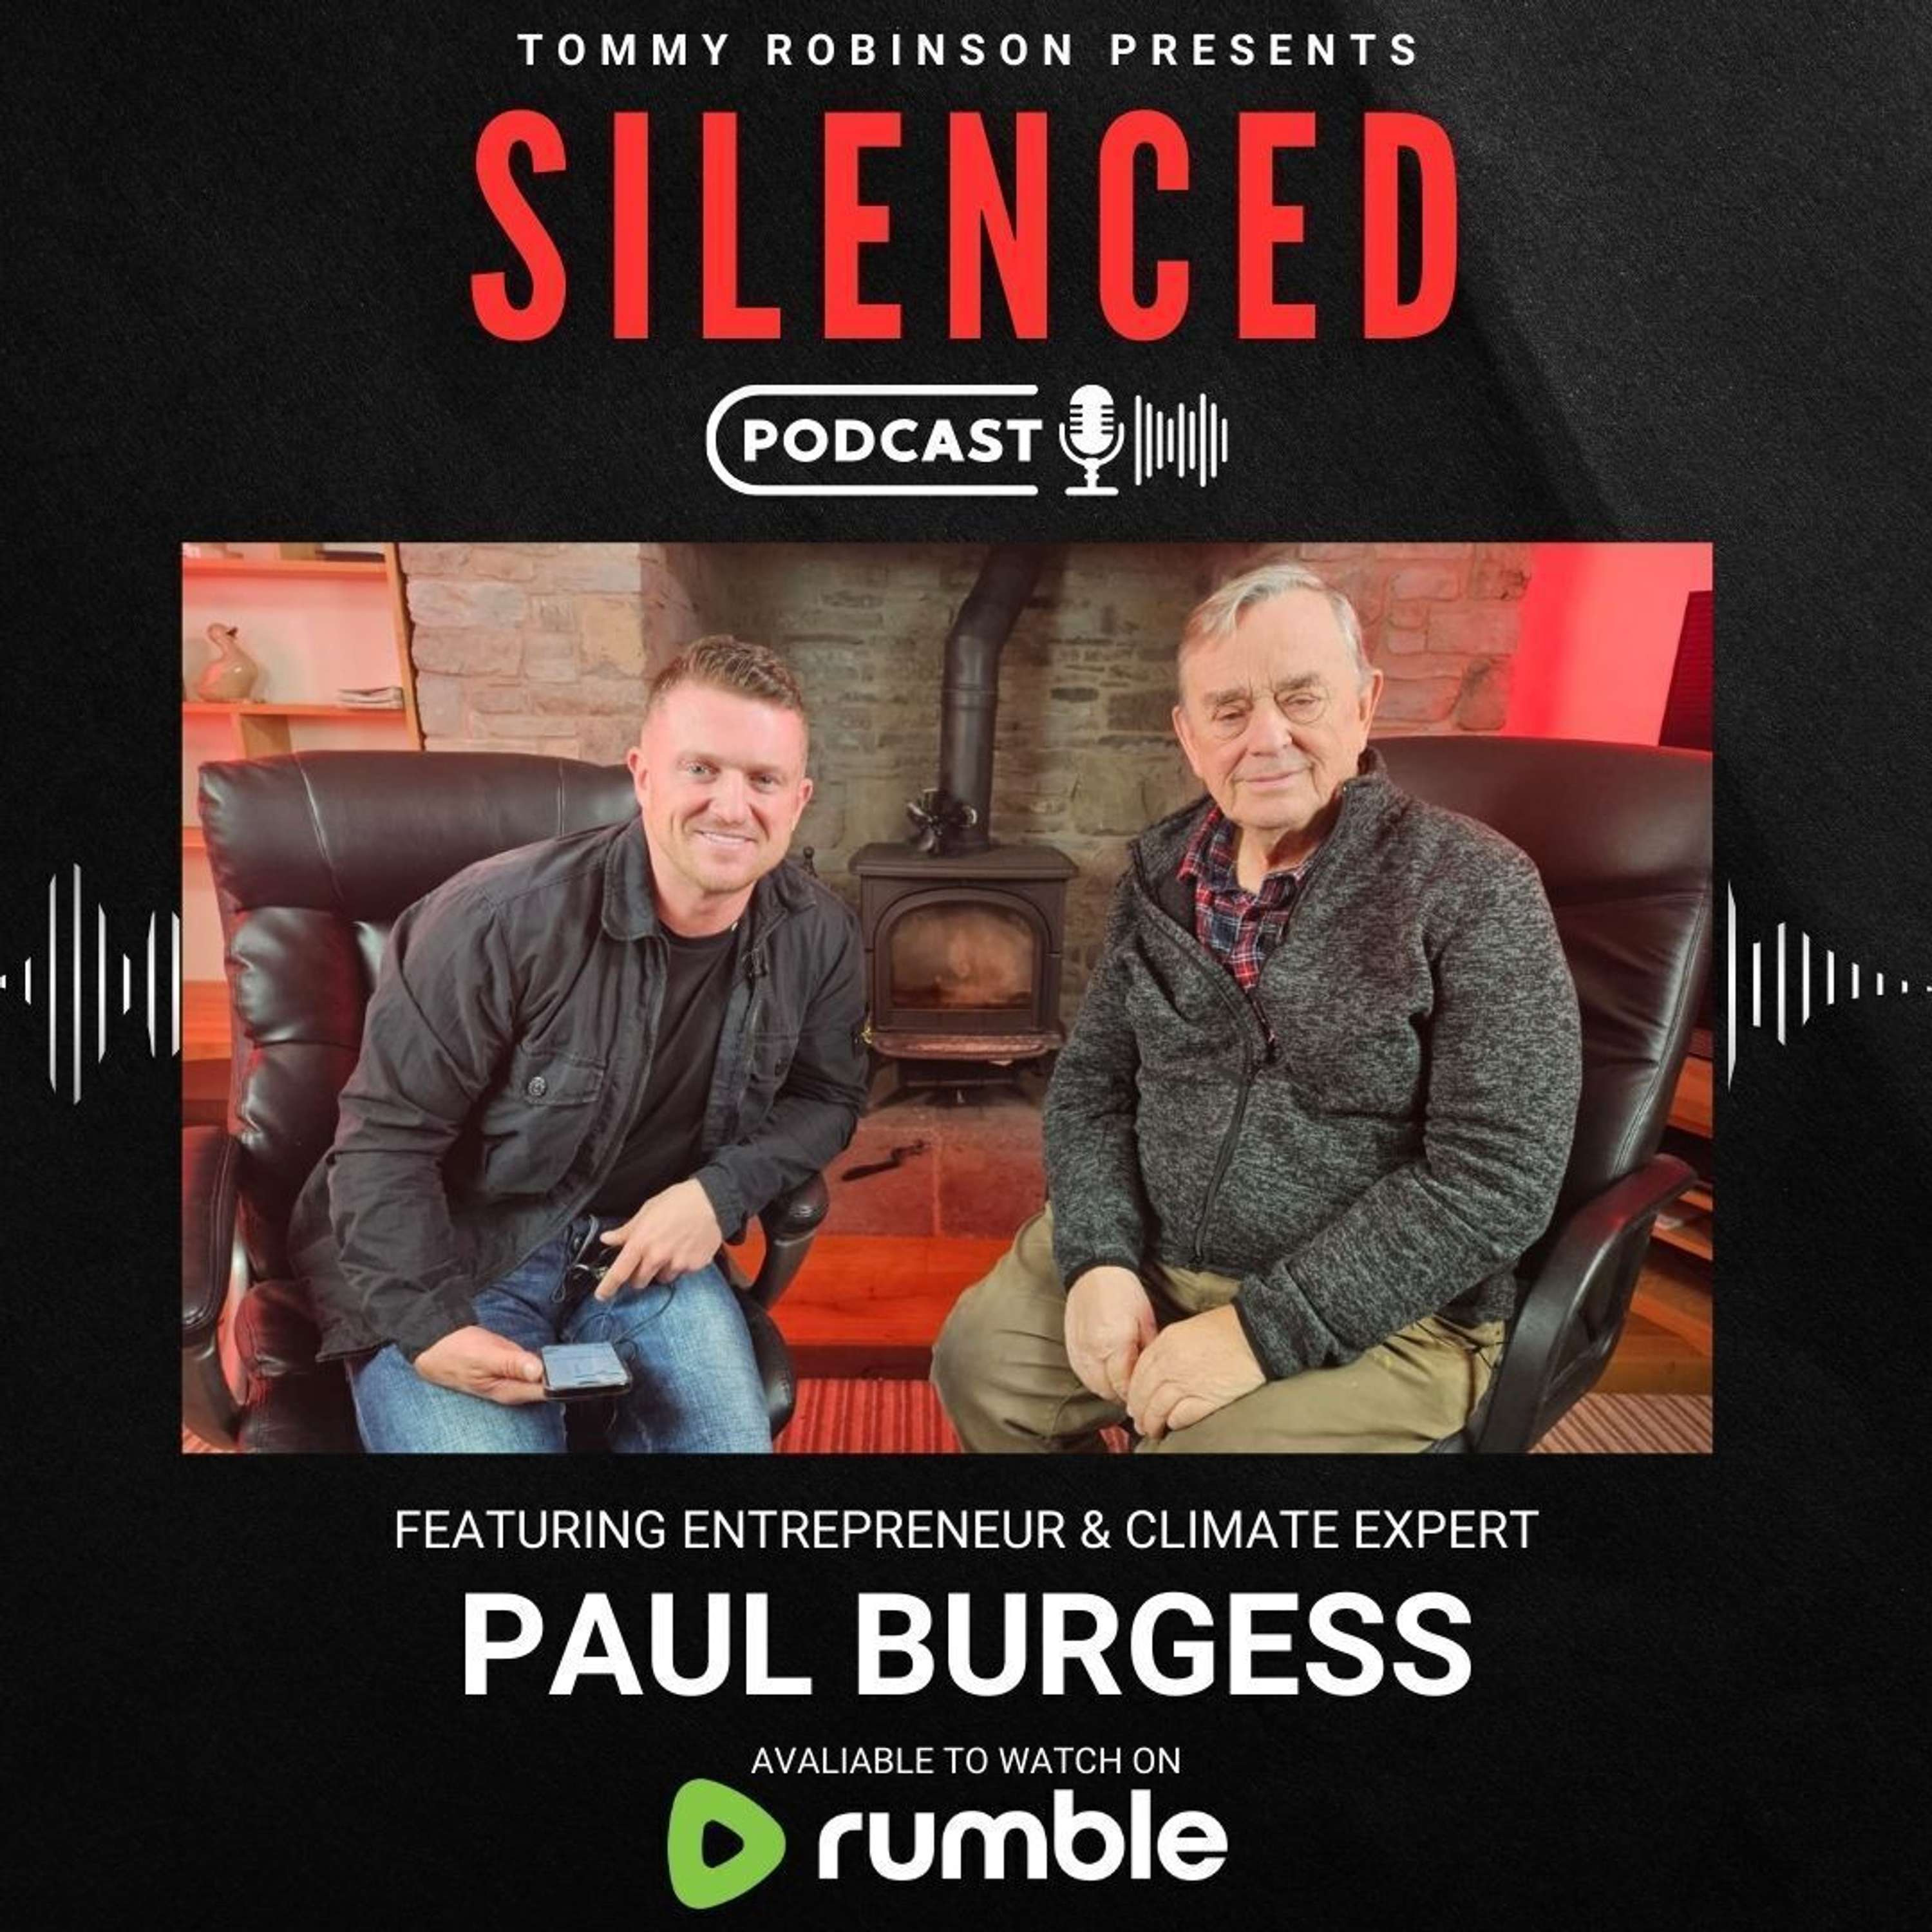 Episode 24 - SILENCED with Tommy Robinson - Paul Burgess